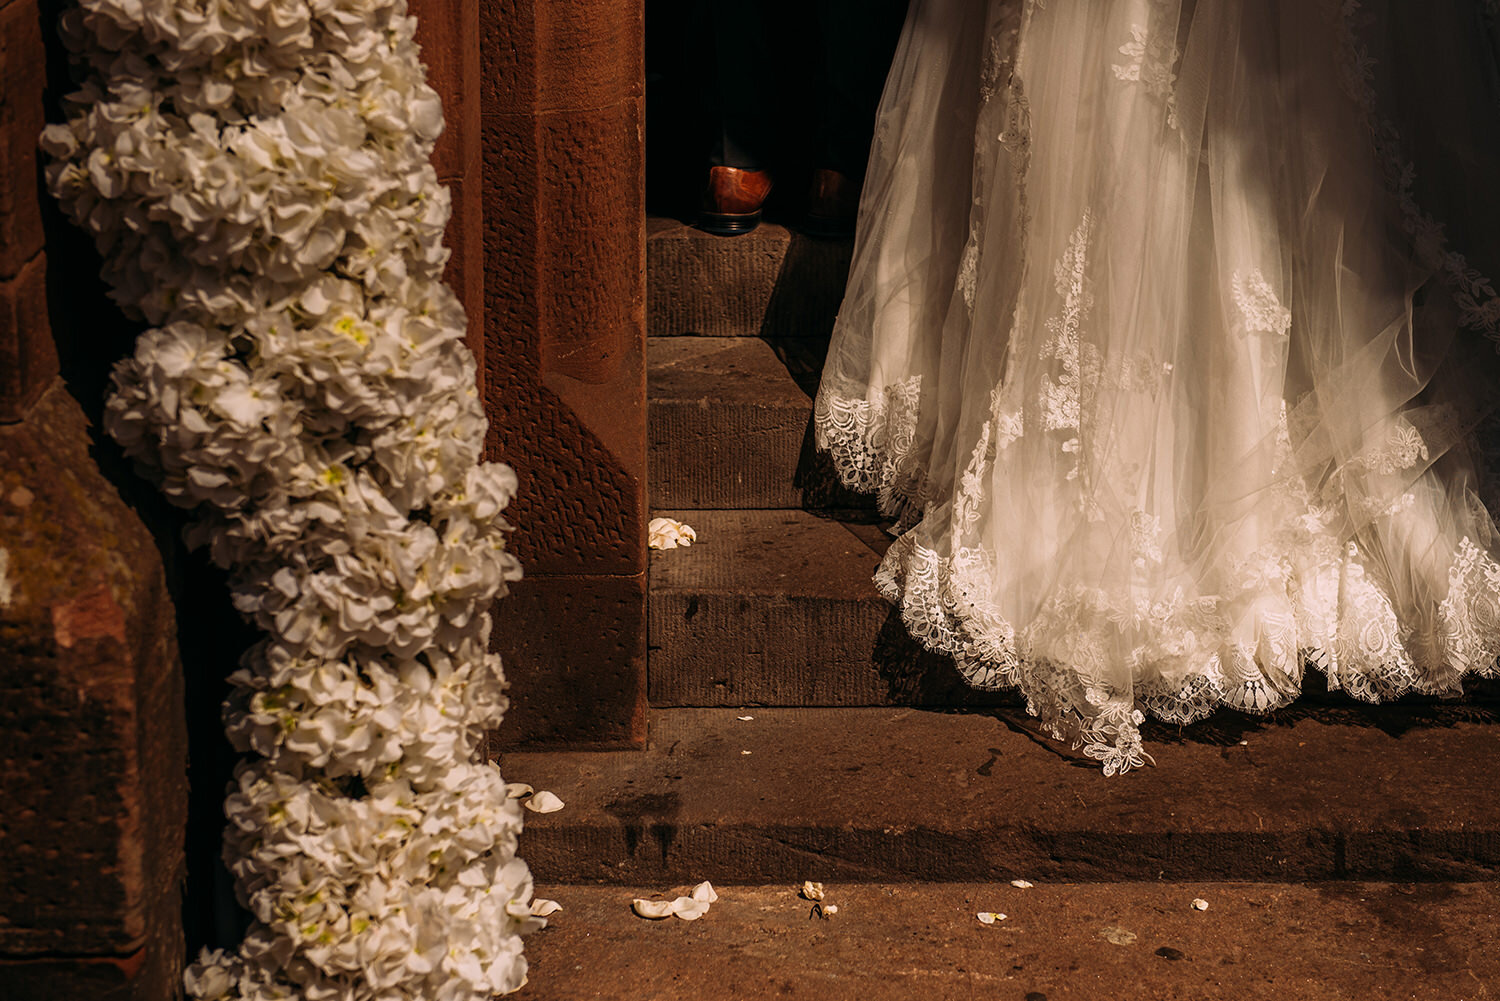  detail of brides dress as she walks up steps past flowers 